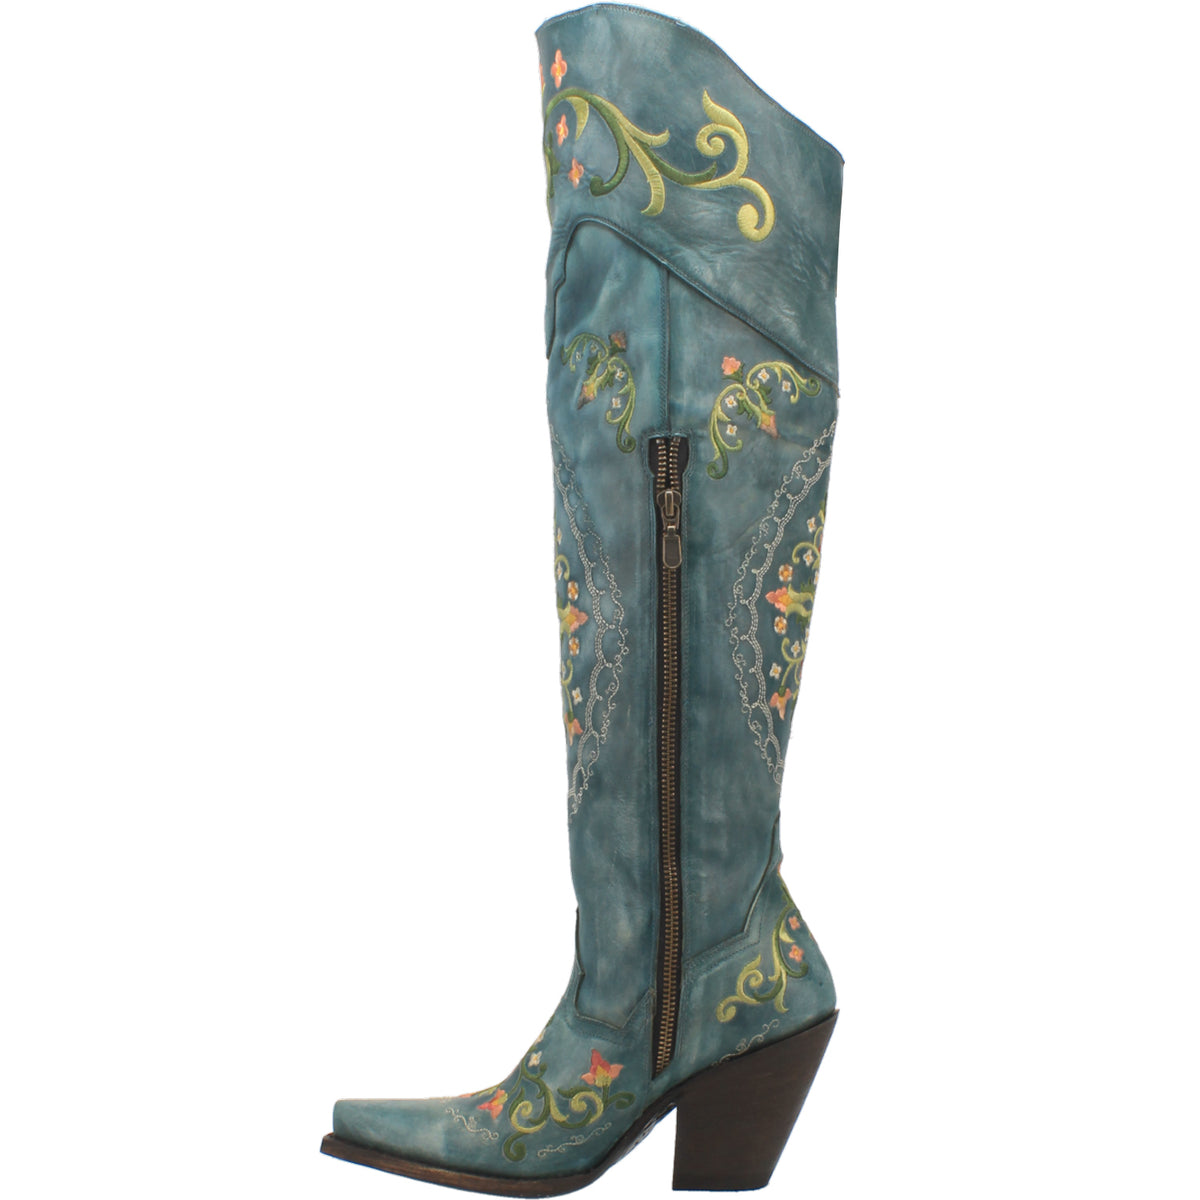 FLOWER CHILD LEATHER BOOT Cover